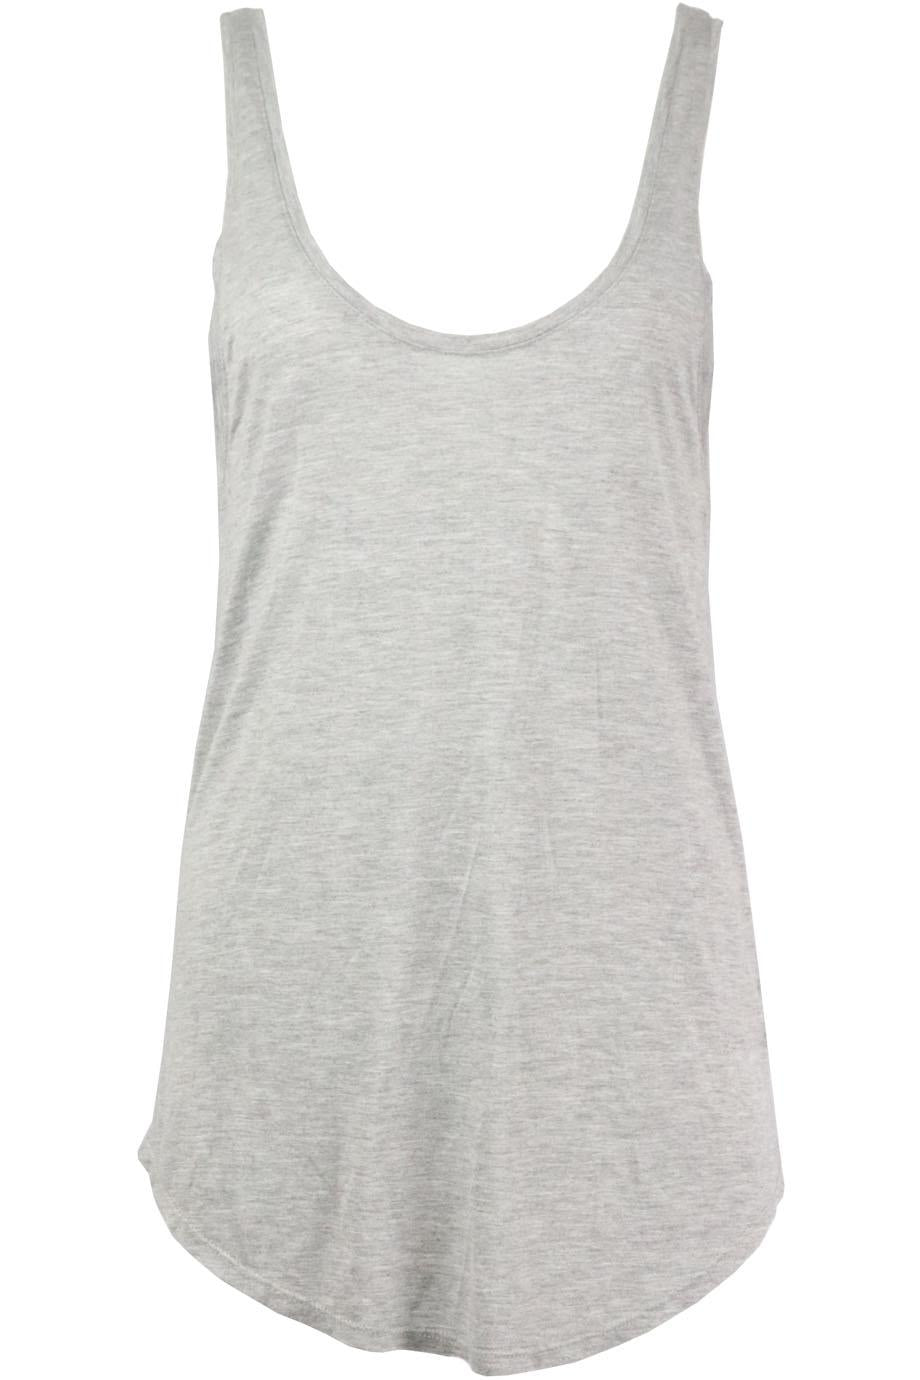 FRAME STRETCH JERSEY TANK TOP SMALL